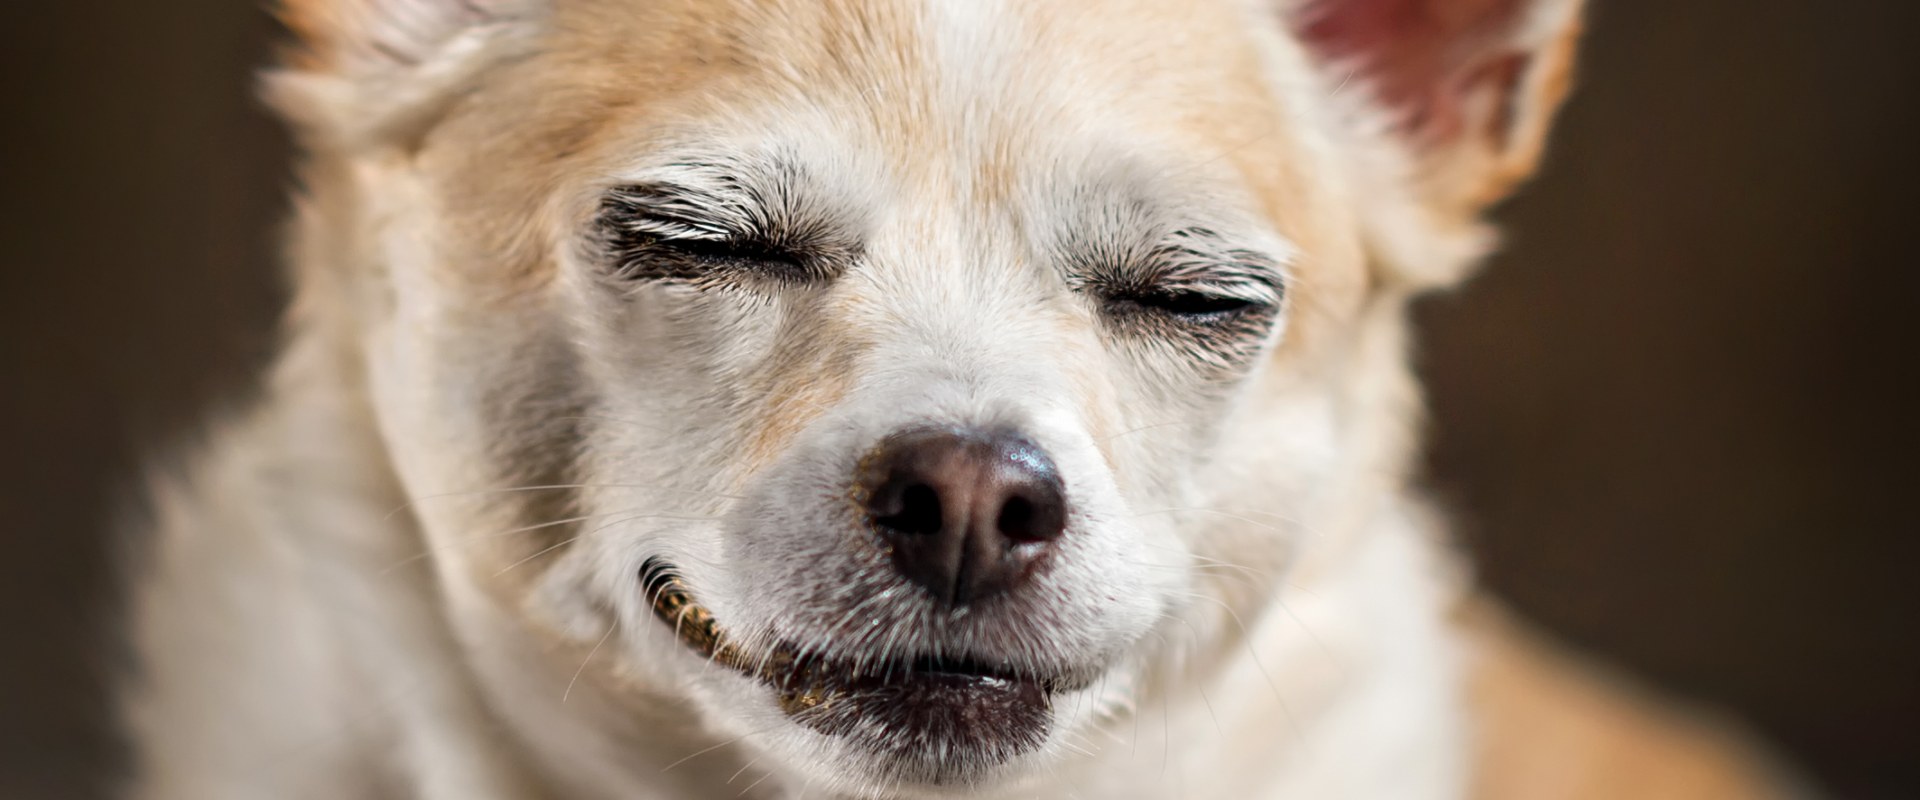 Is thc okay to give dogs?